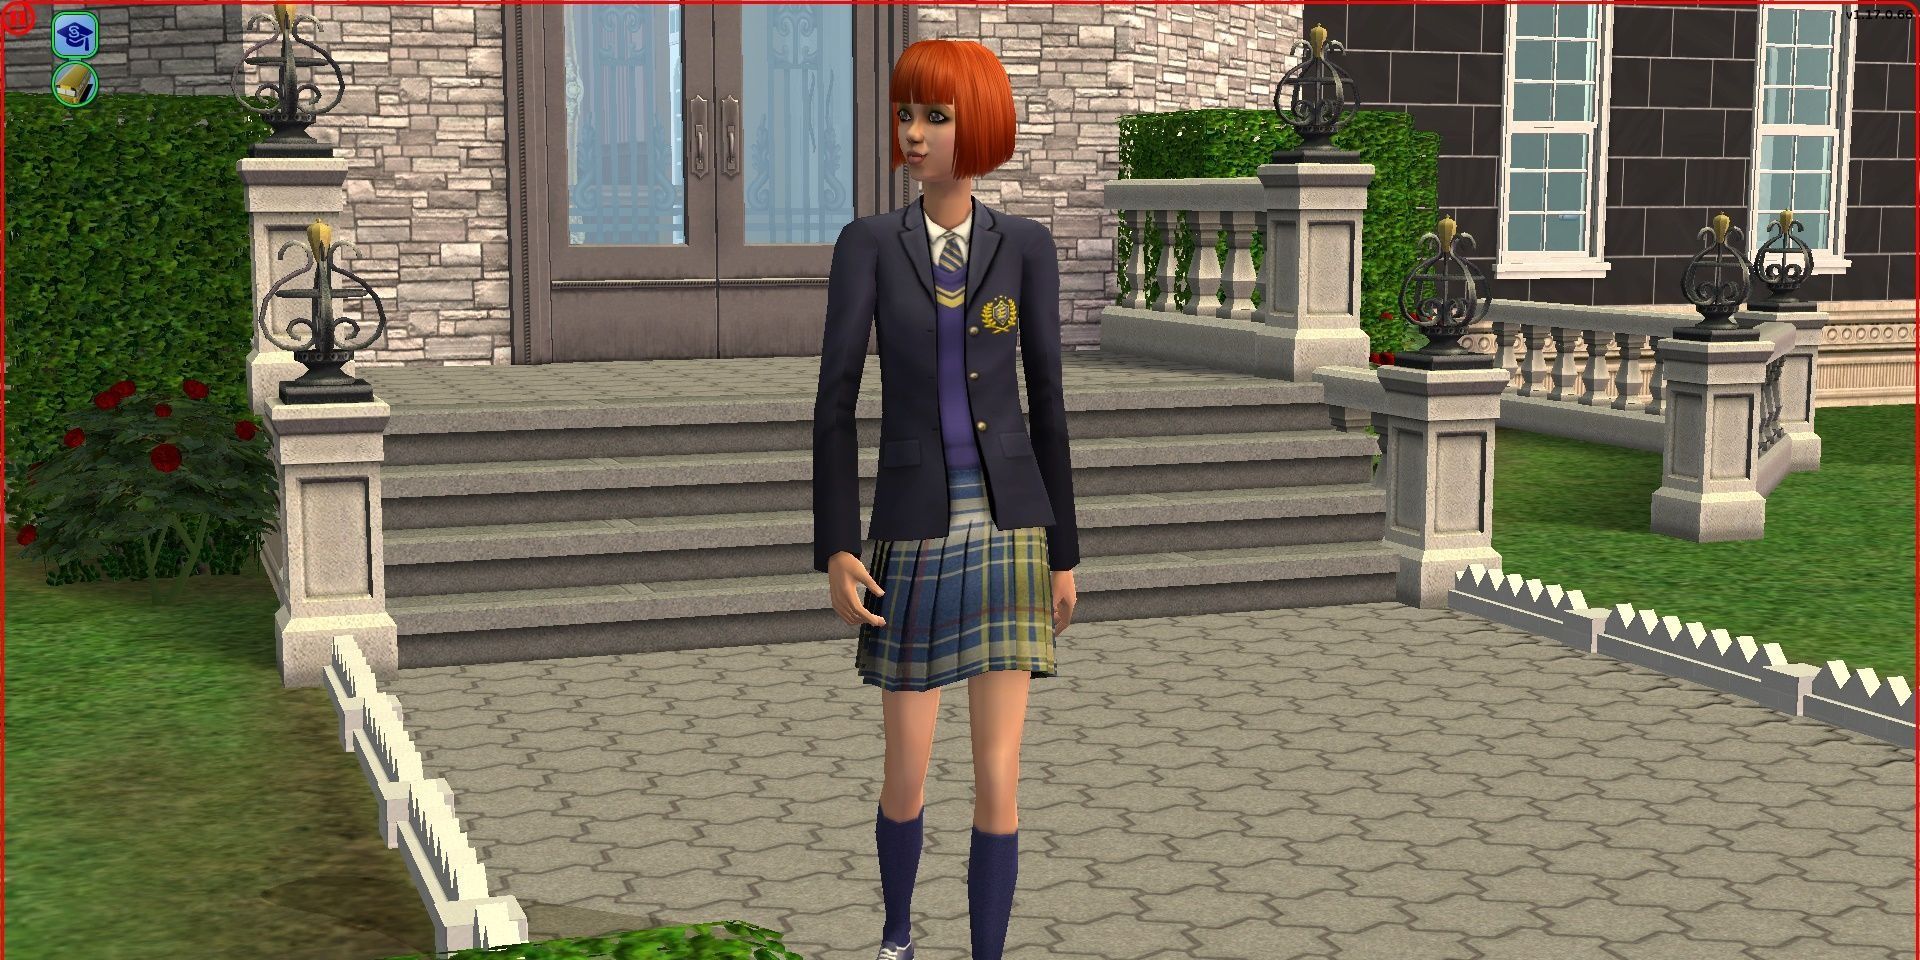 A teenage Sim on her way to private school in The Sims 2